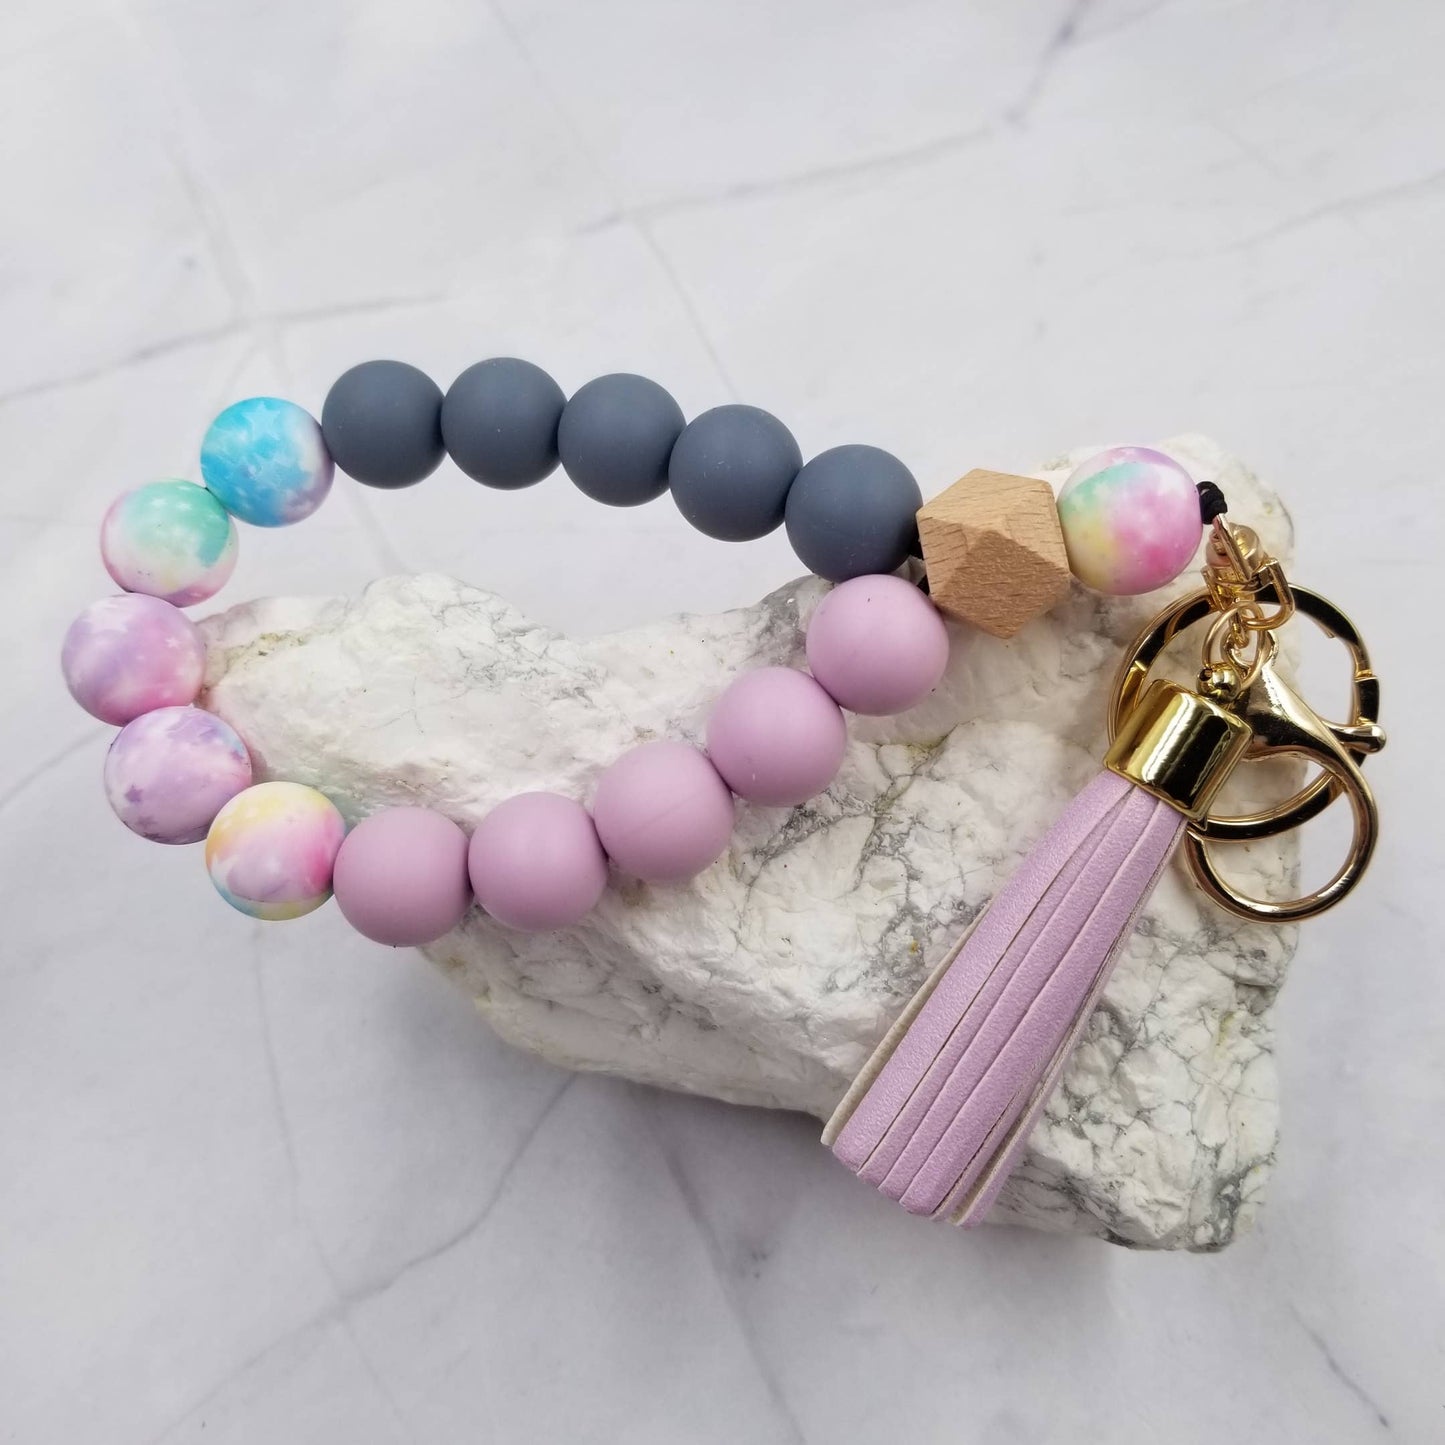 Tie Dye Silicone Bead Bangle Keychain - Several Styles